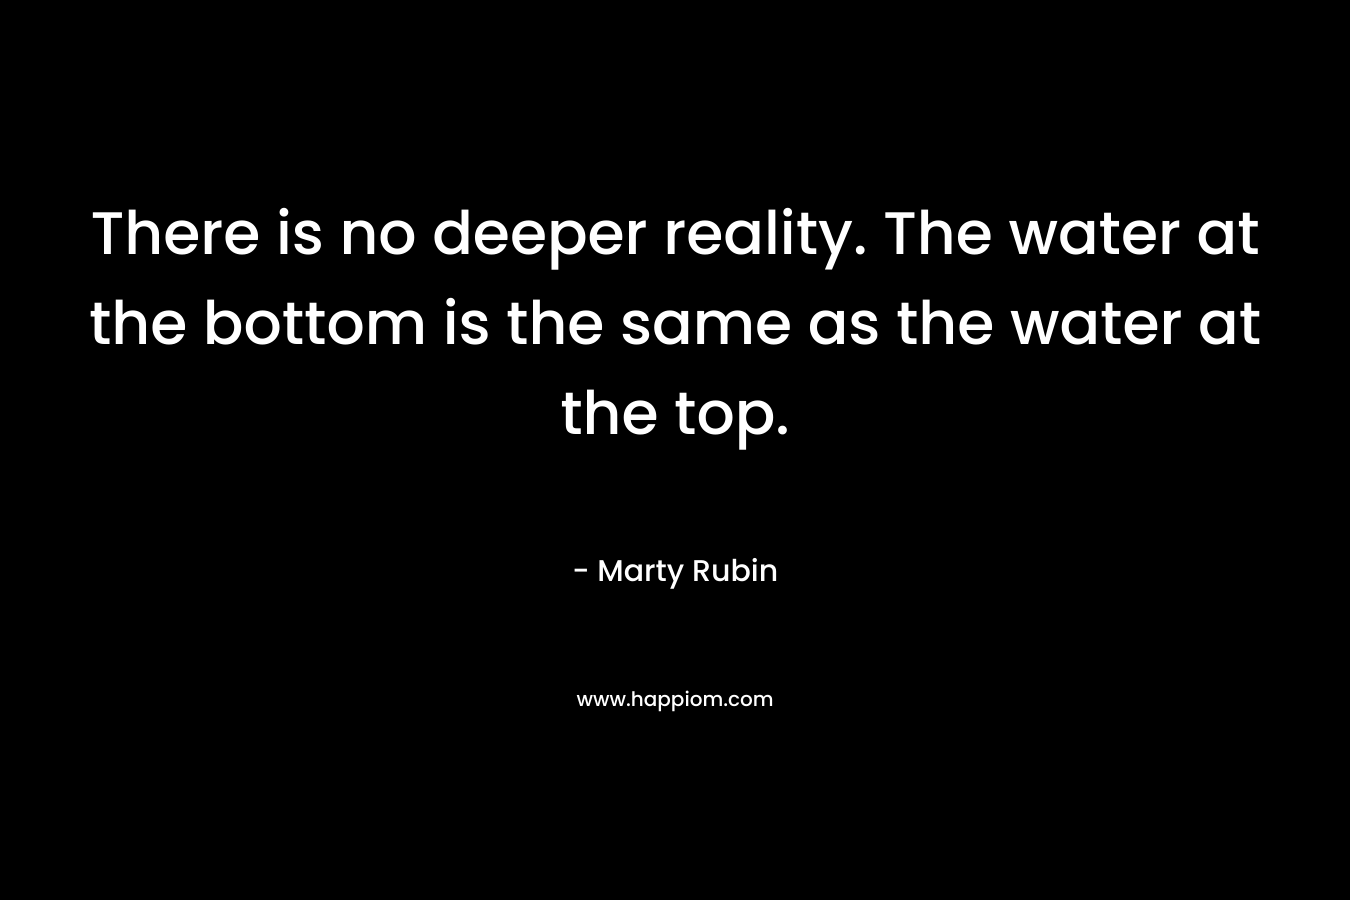 There is no deeper reality. The water at the bottom is the same as the water at the top.